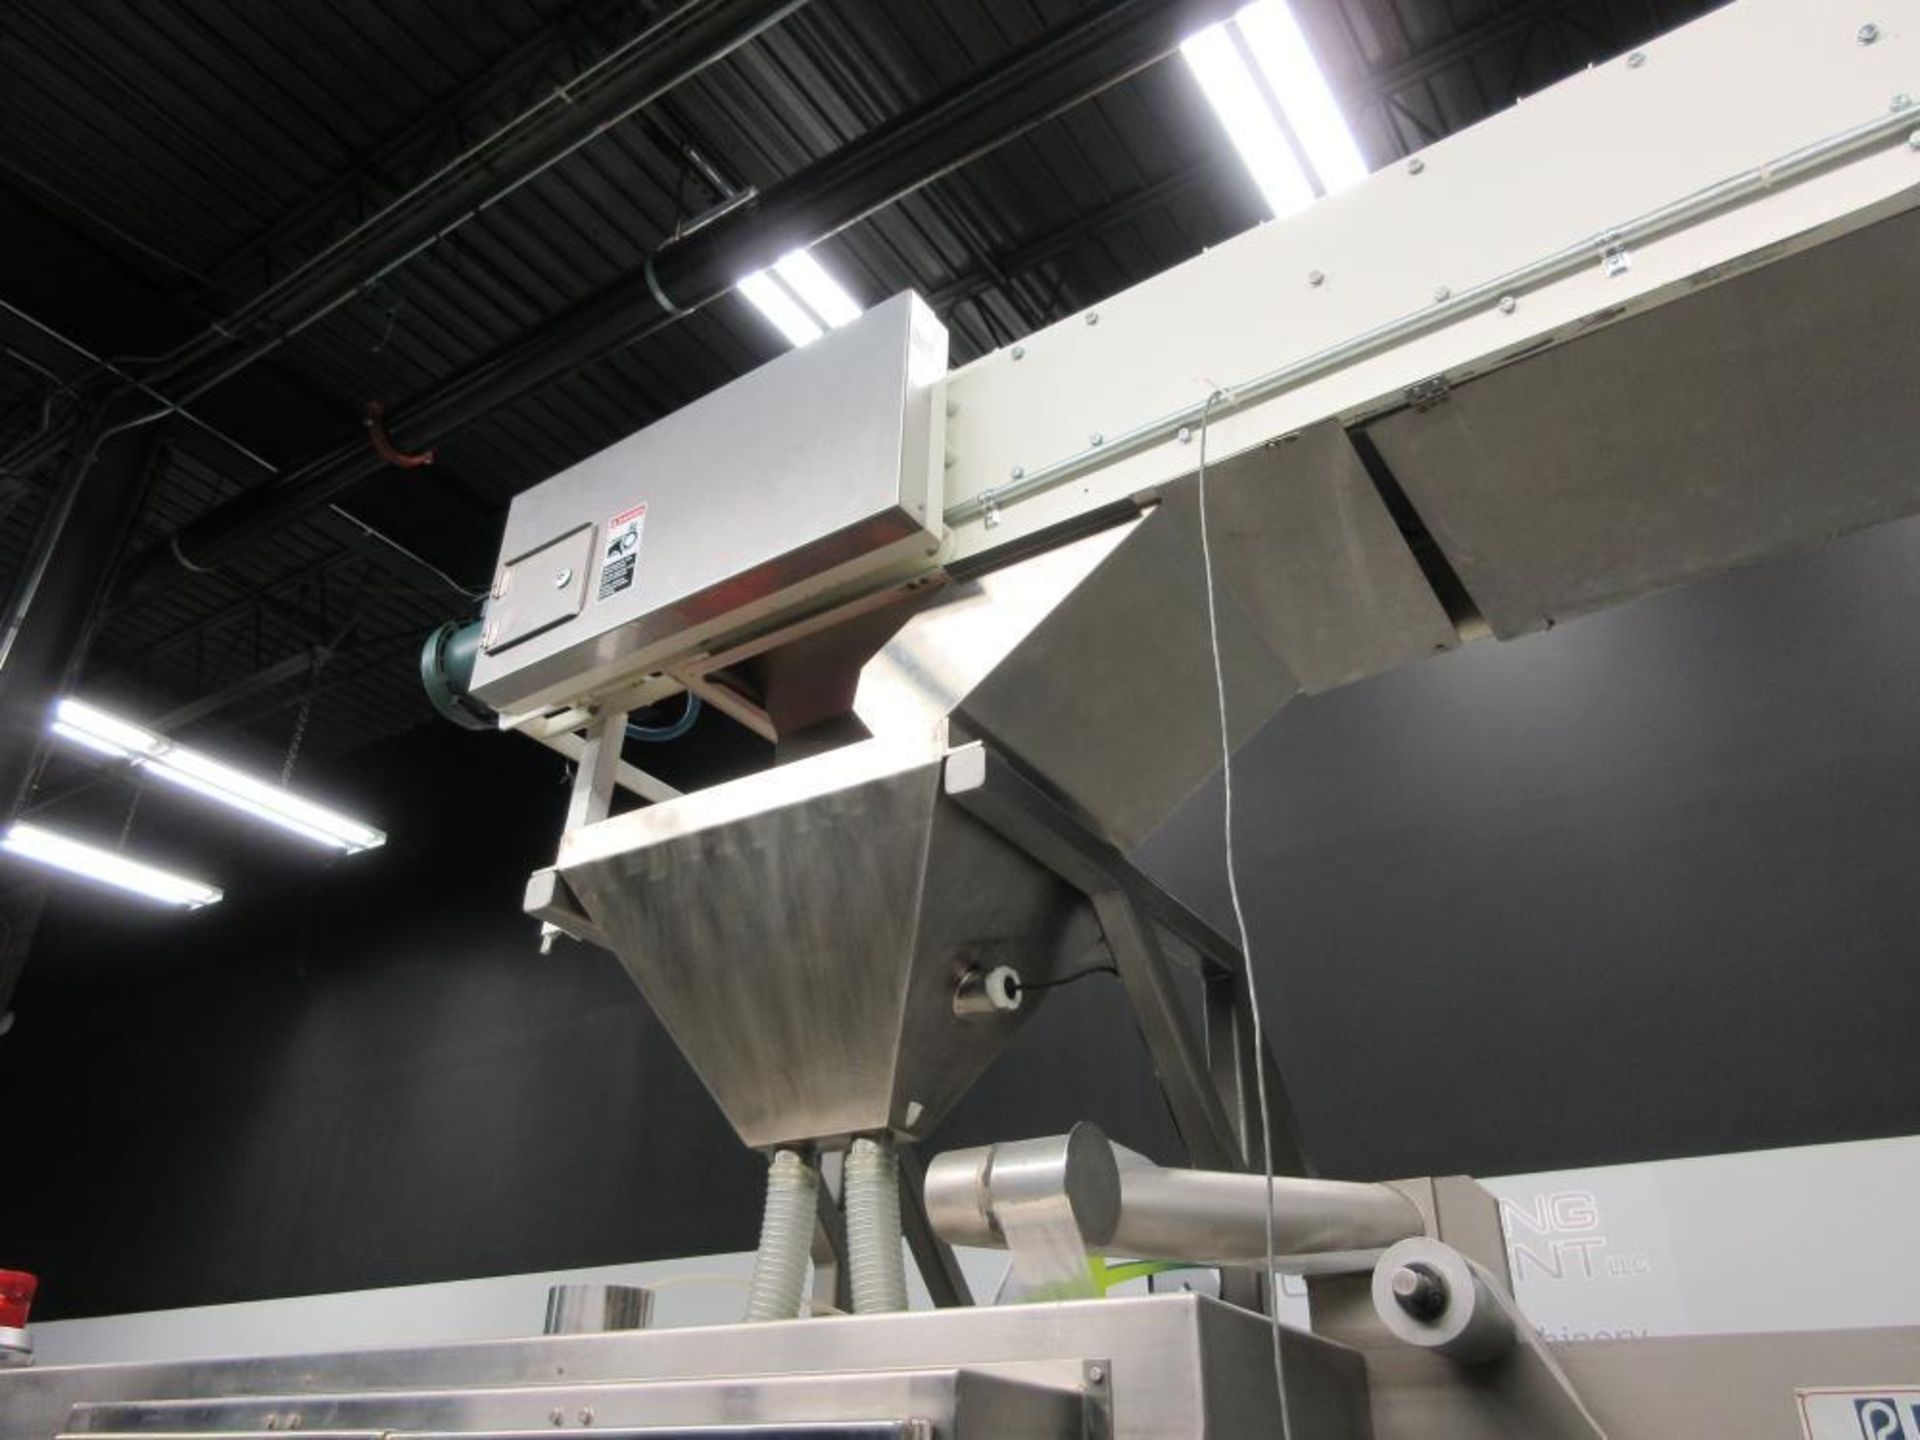 Ropak Model V High-Speed Rotary Pouch Machine with Volumetric Screw Product Feeder - Image 9 of 30